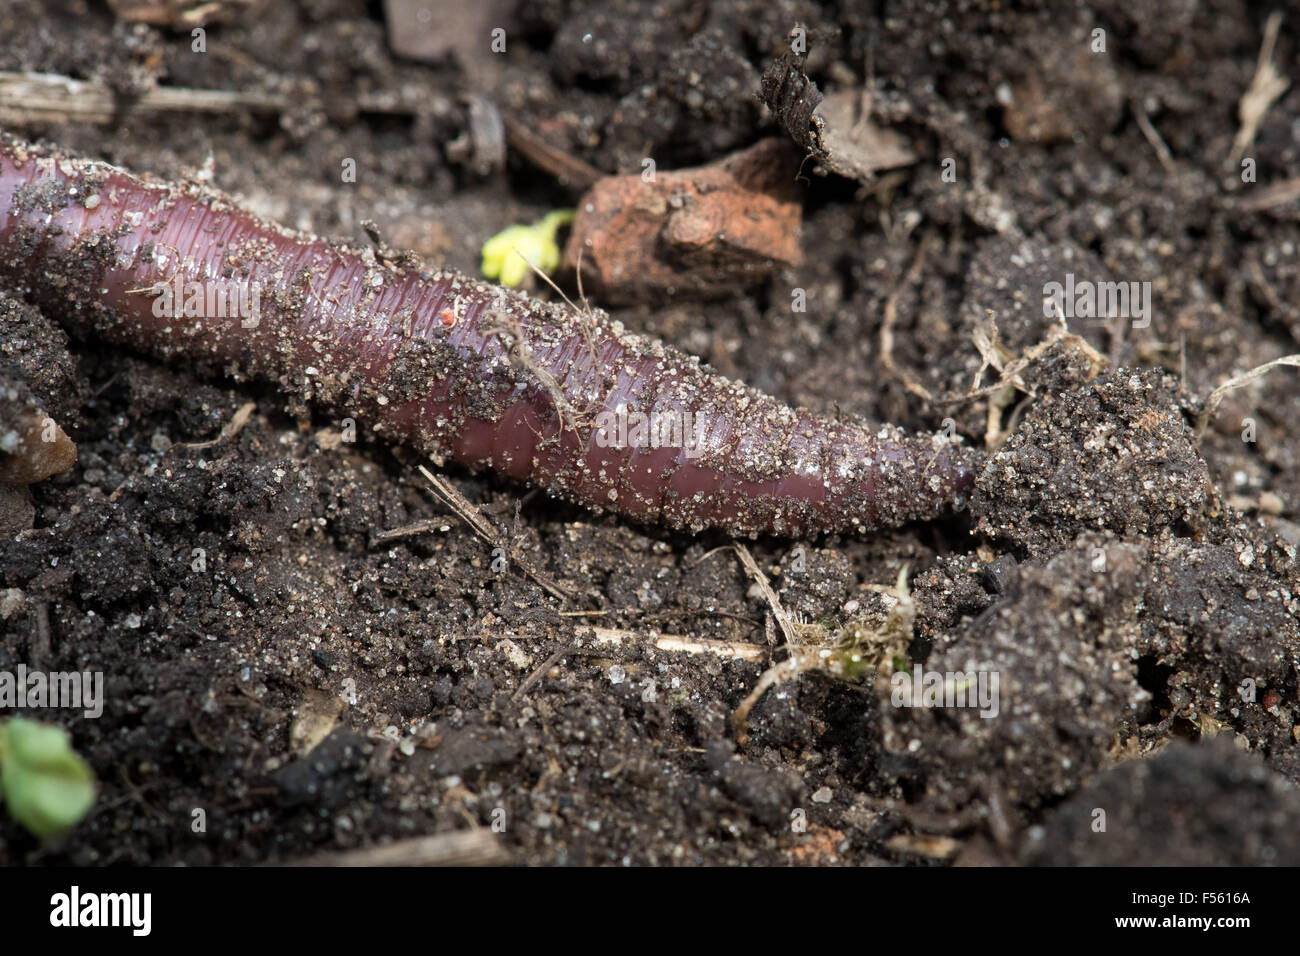 02.05.2015, Berlin, Berlin, Germany  - The earthworms (Lumbricidae) are living in the soil, articulated worms from the order of the oligochaeta (Oligochaeta). 00Y150502D007CAROEX.JPG - NOT for SALE in G E R M A N Y, A U S T R I A, S W I T Z E R L A N D [MODEL RELEASE: NOT APPLICABLE, PROPERTY RELEASE: NO (c) caro photo agency / Teich, http://www.caro-images.pl, info@carofoto.pl - In case of using the picture for non-journalistic purposes, please contact the agency - the picture is subject to royalty!] Stock Photo